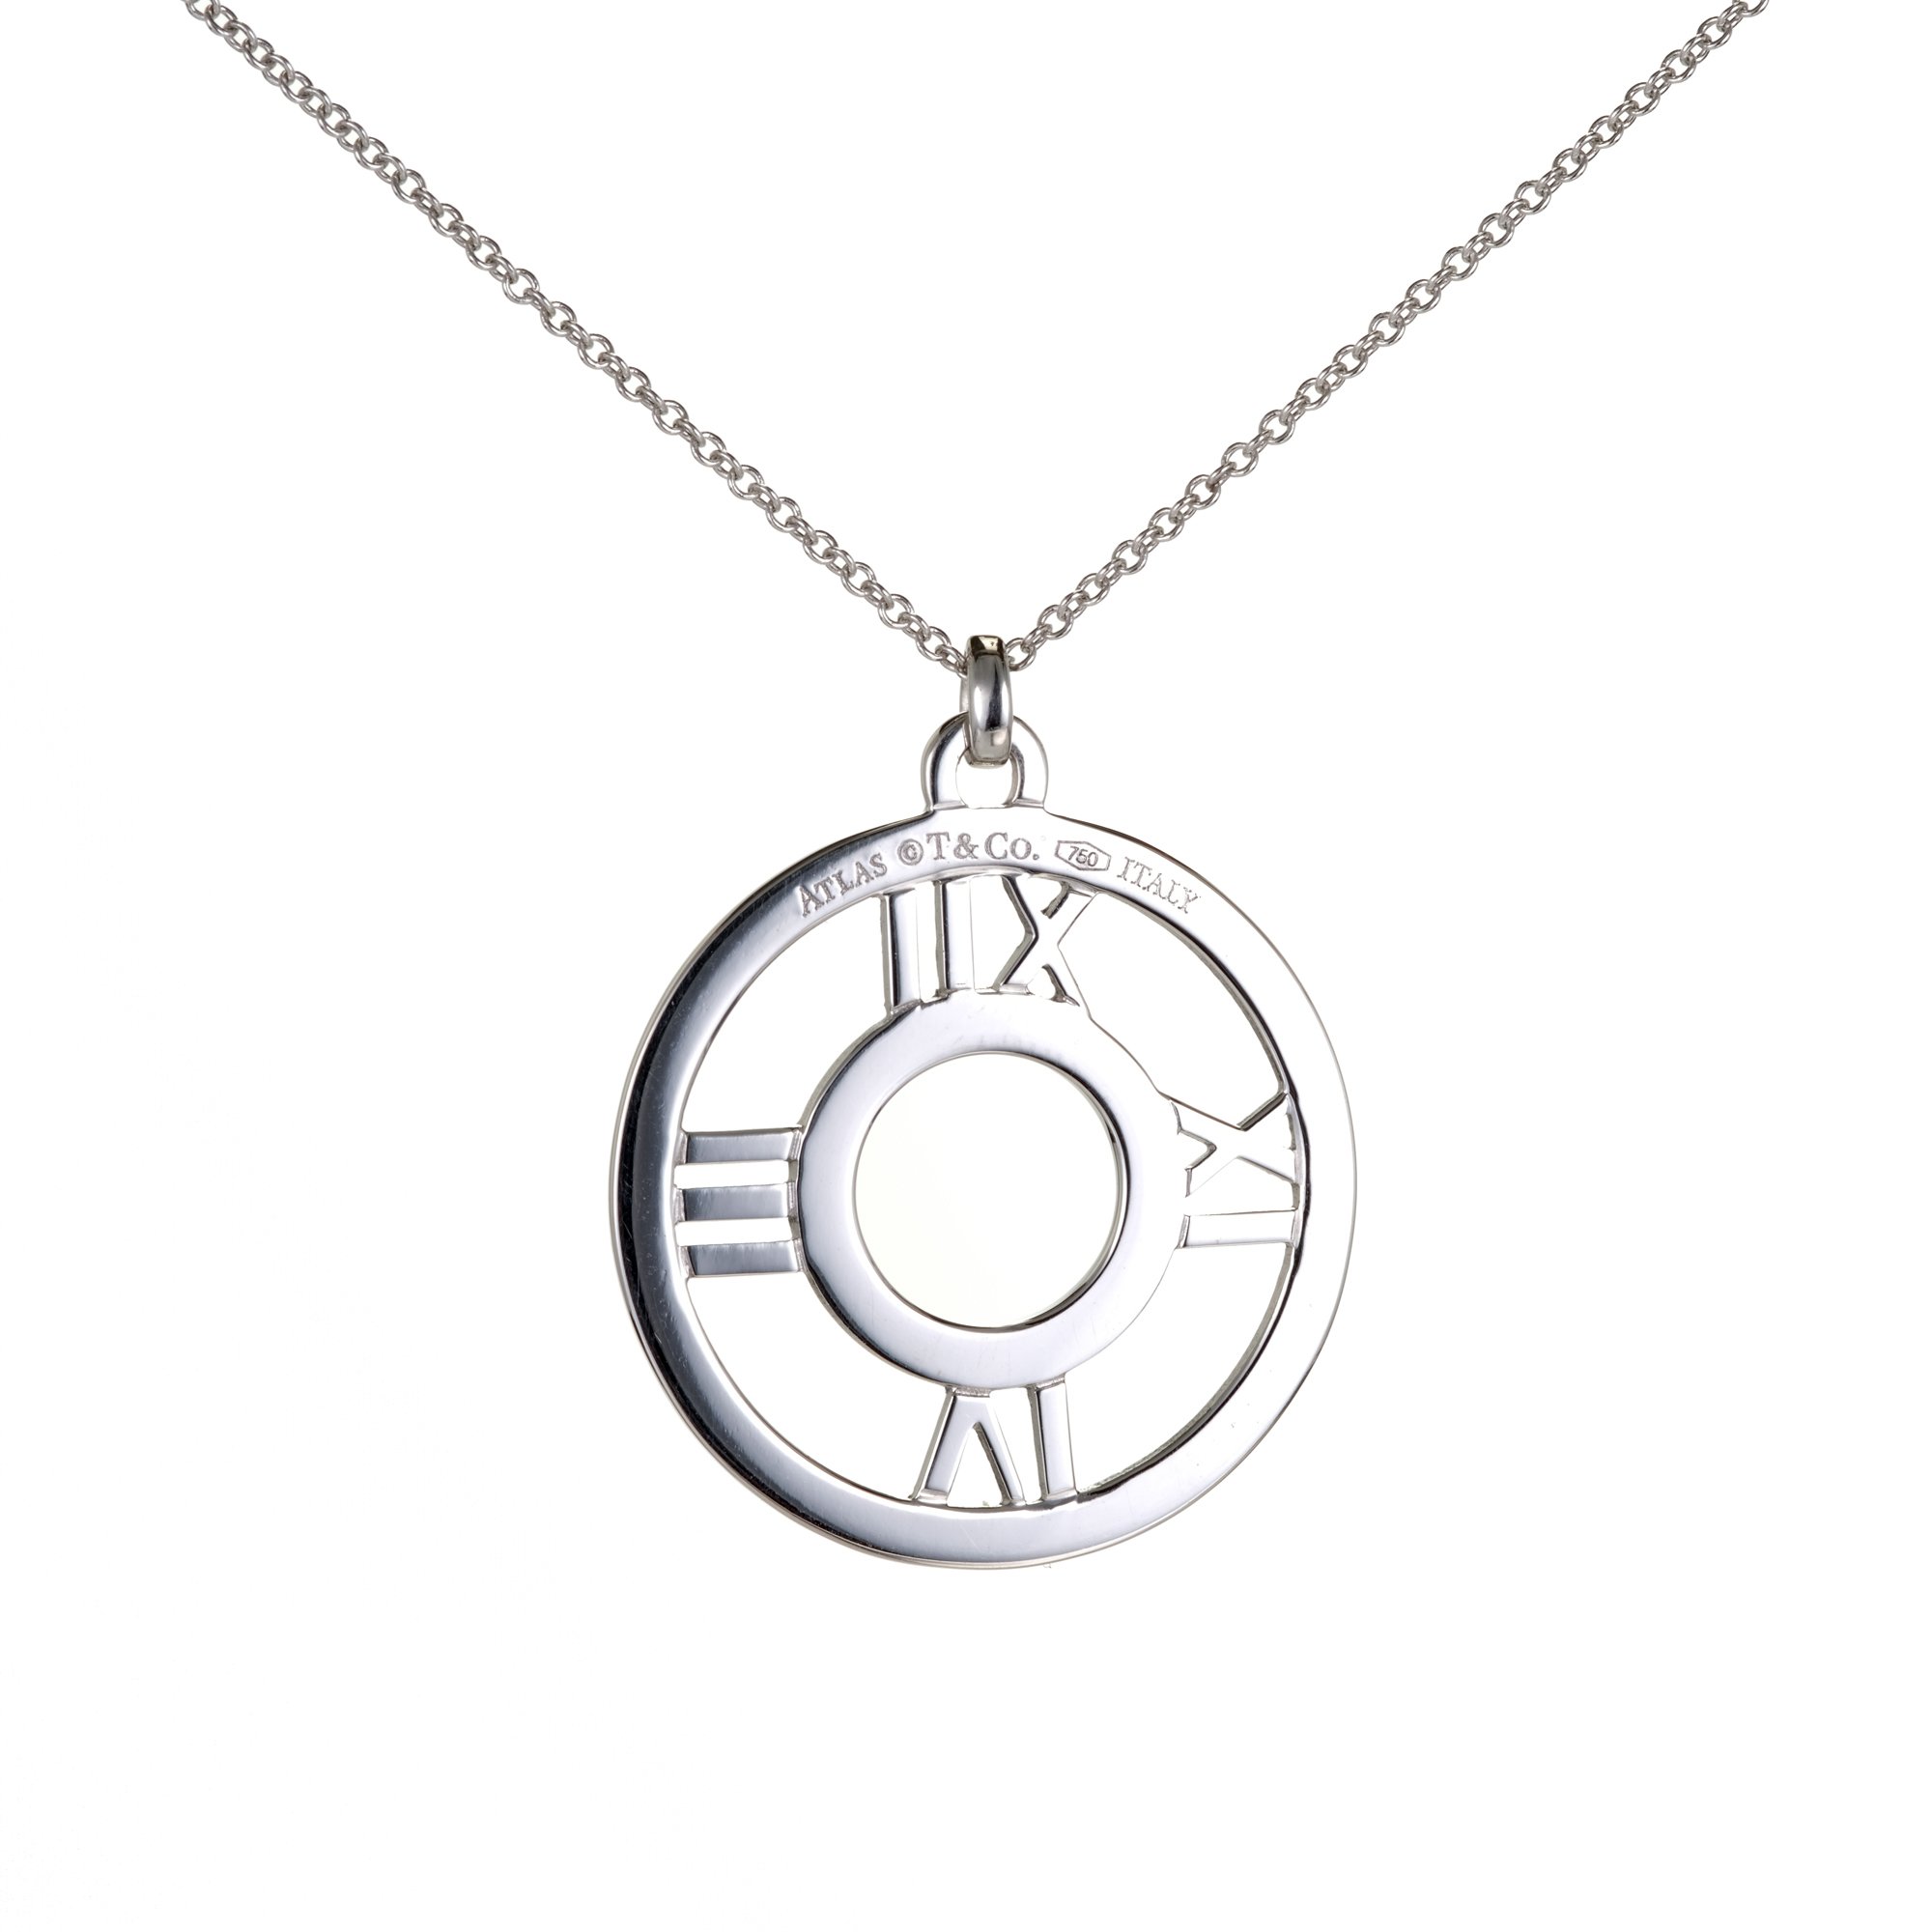 tiffany roman numeral necklace meaning